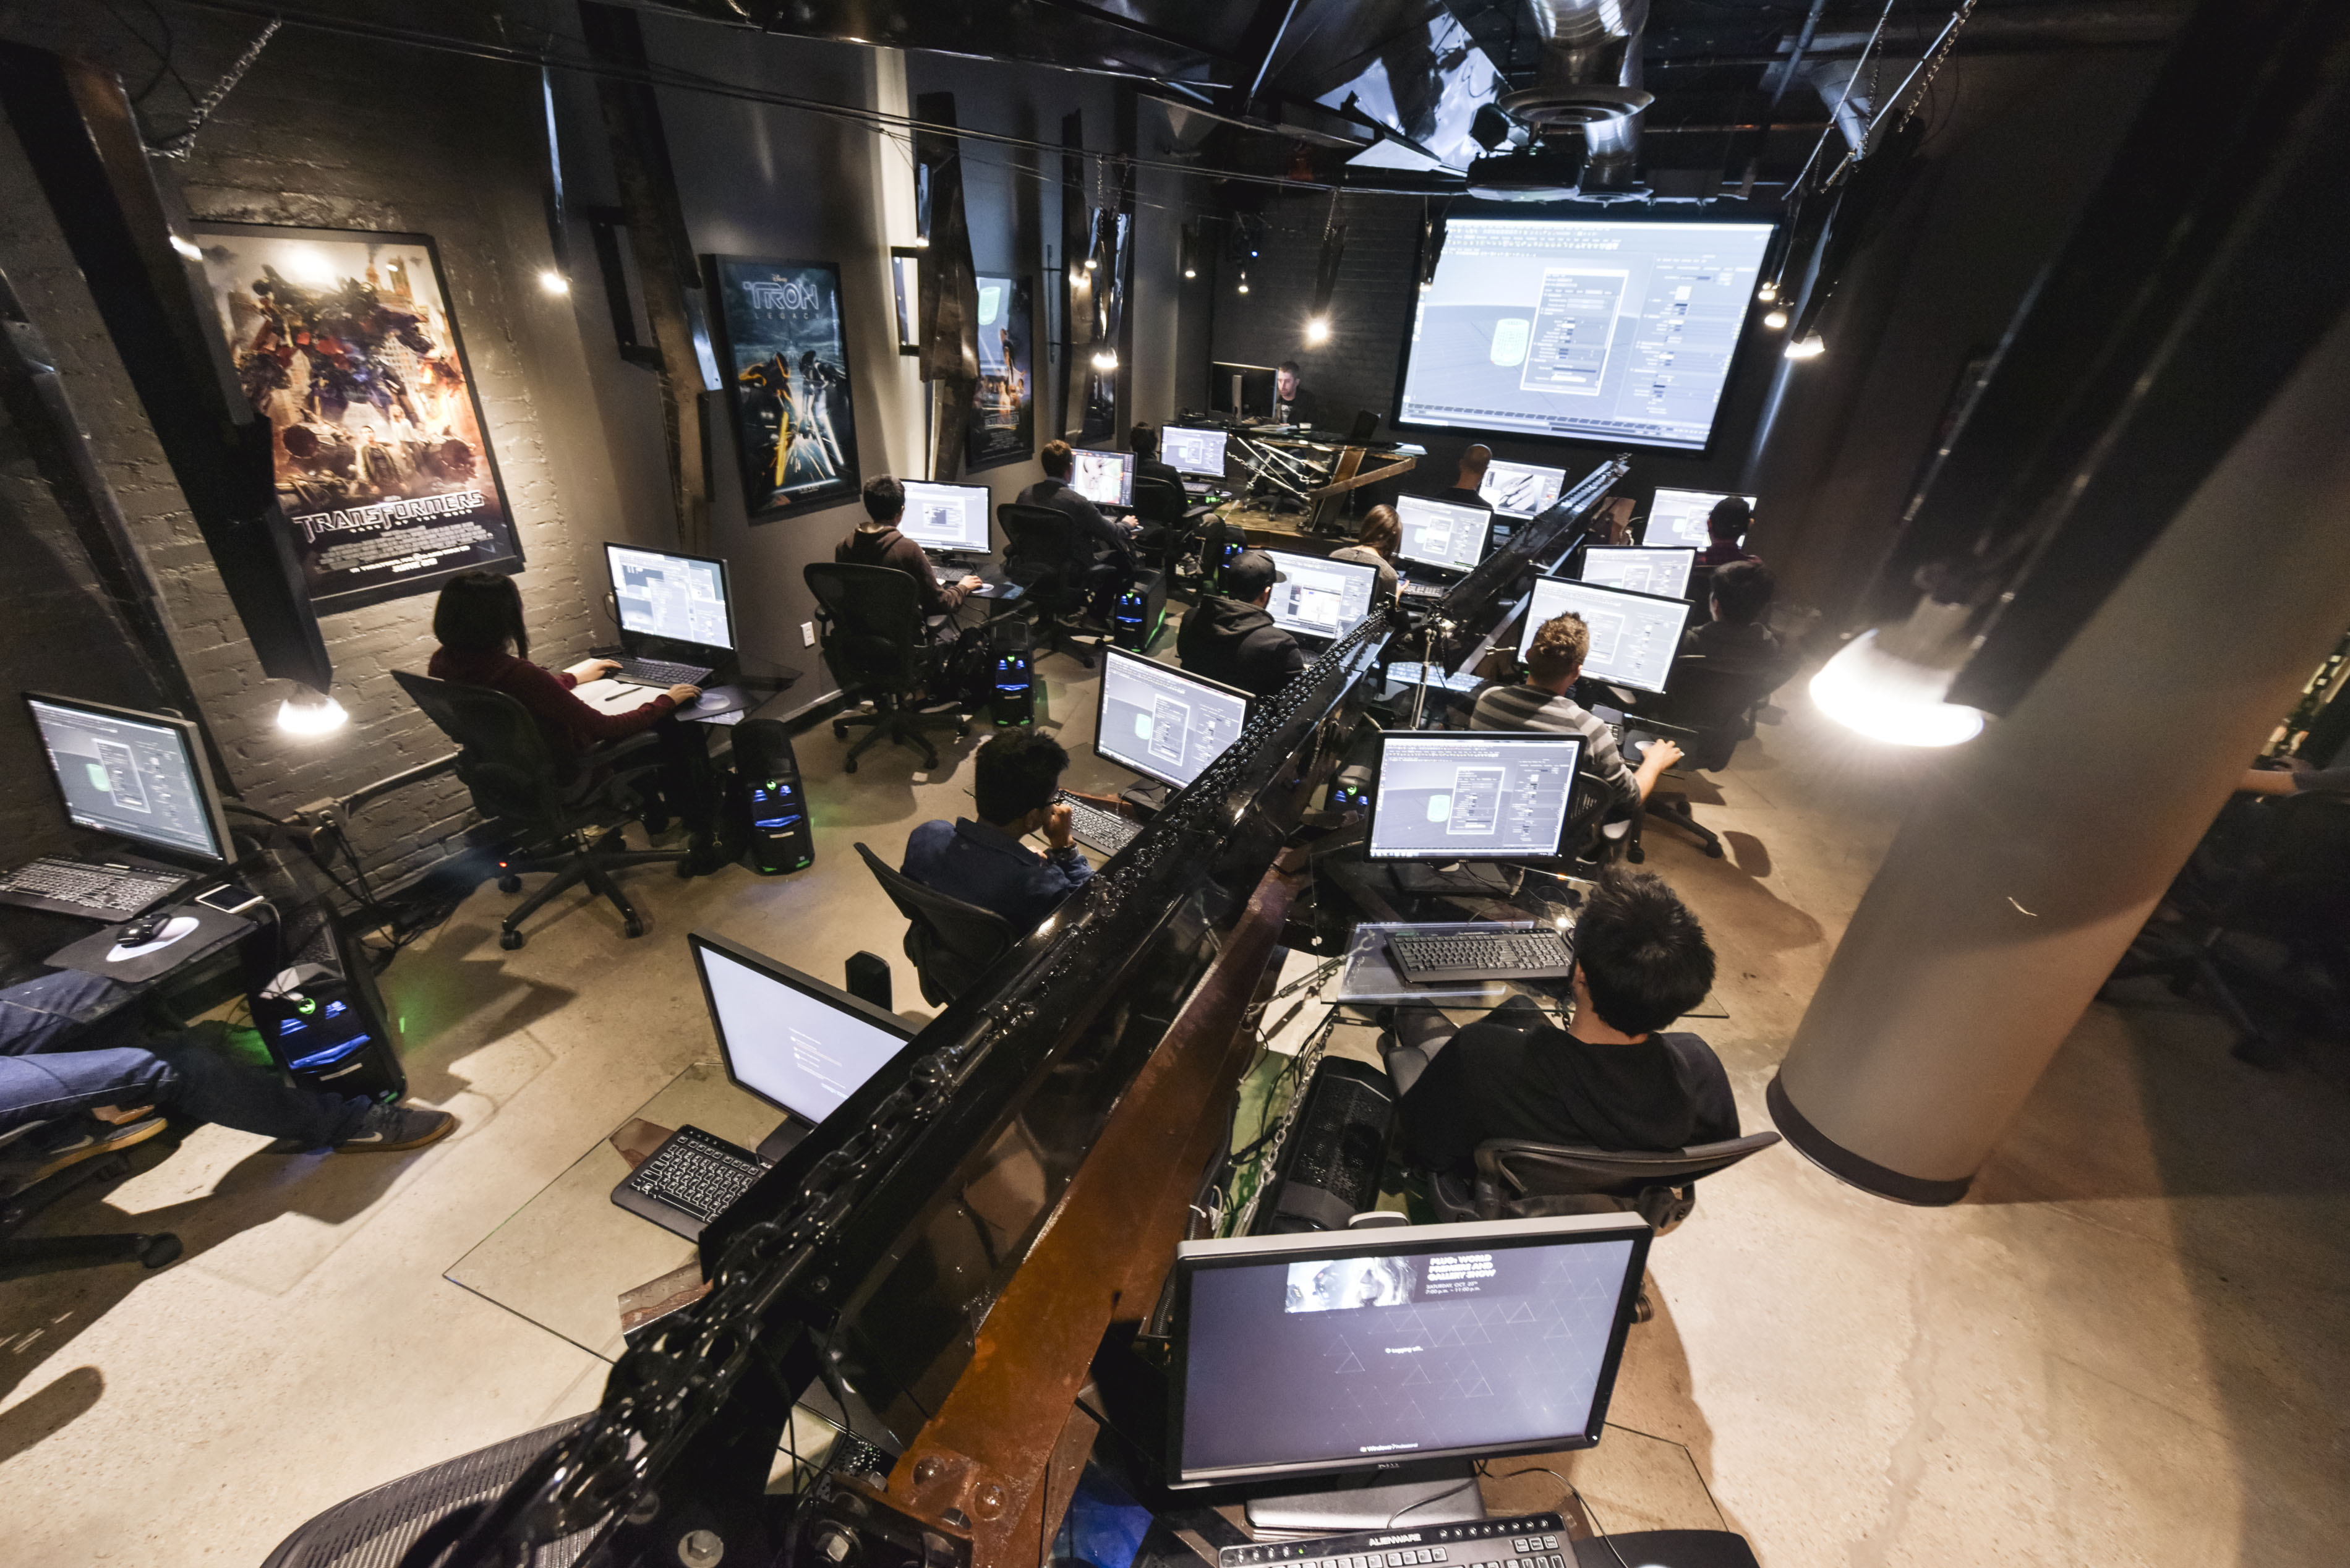 One of nine state-of-the-art classrooms at Gnomon in Hollywood, California